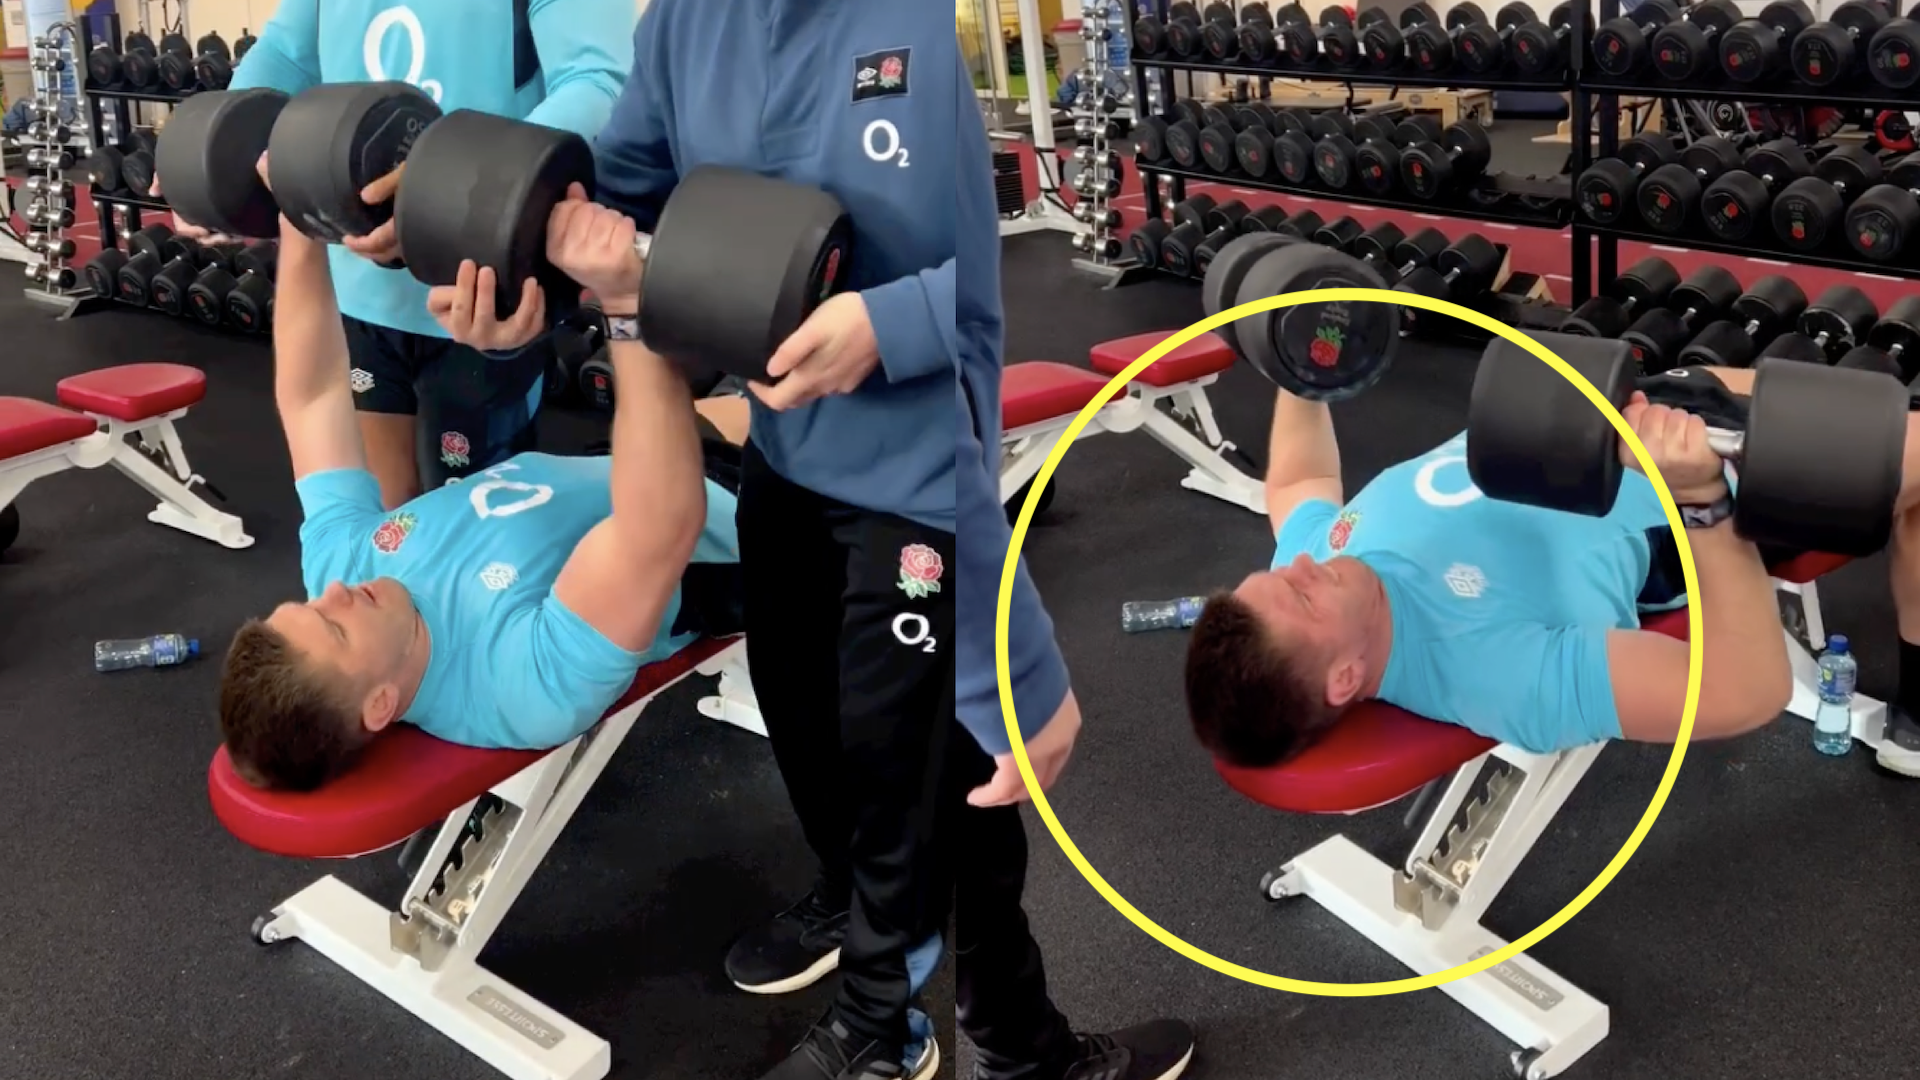 Owen Farrell all but confirms GOAT status with prop-like strength in gym